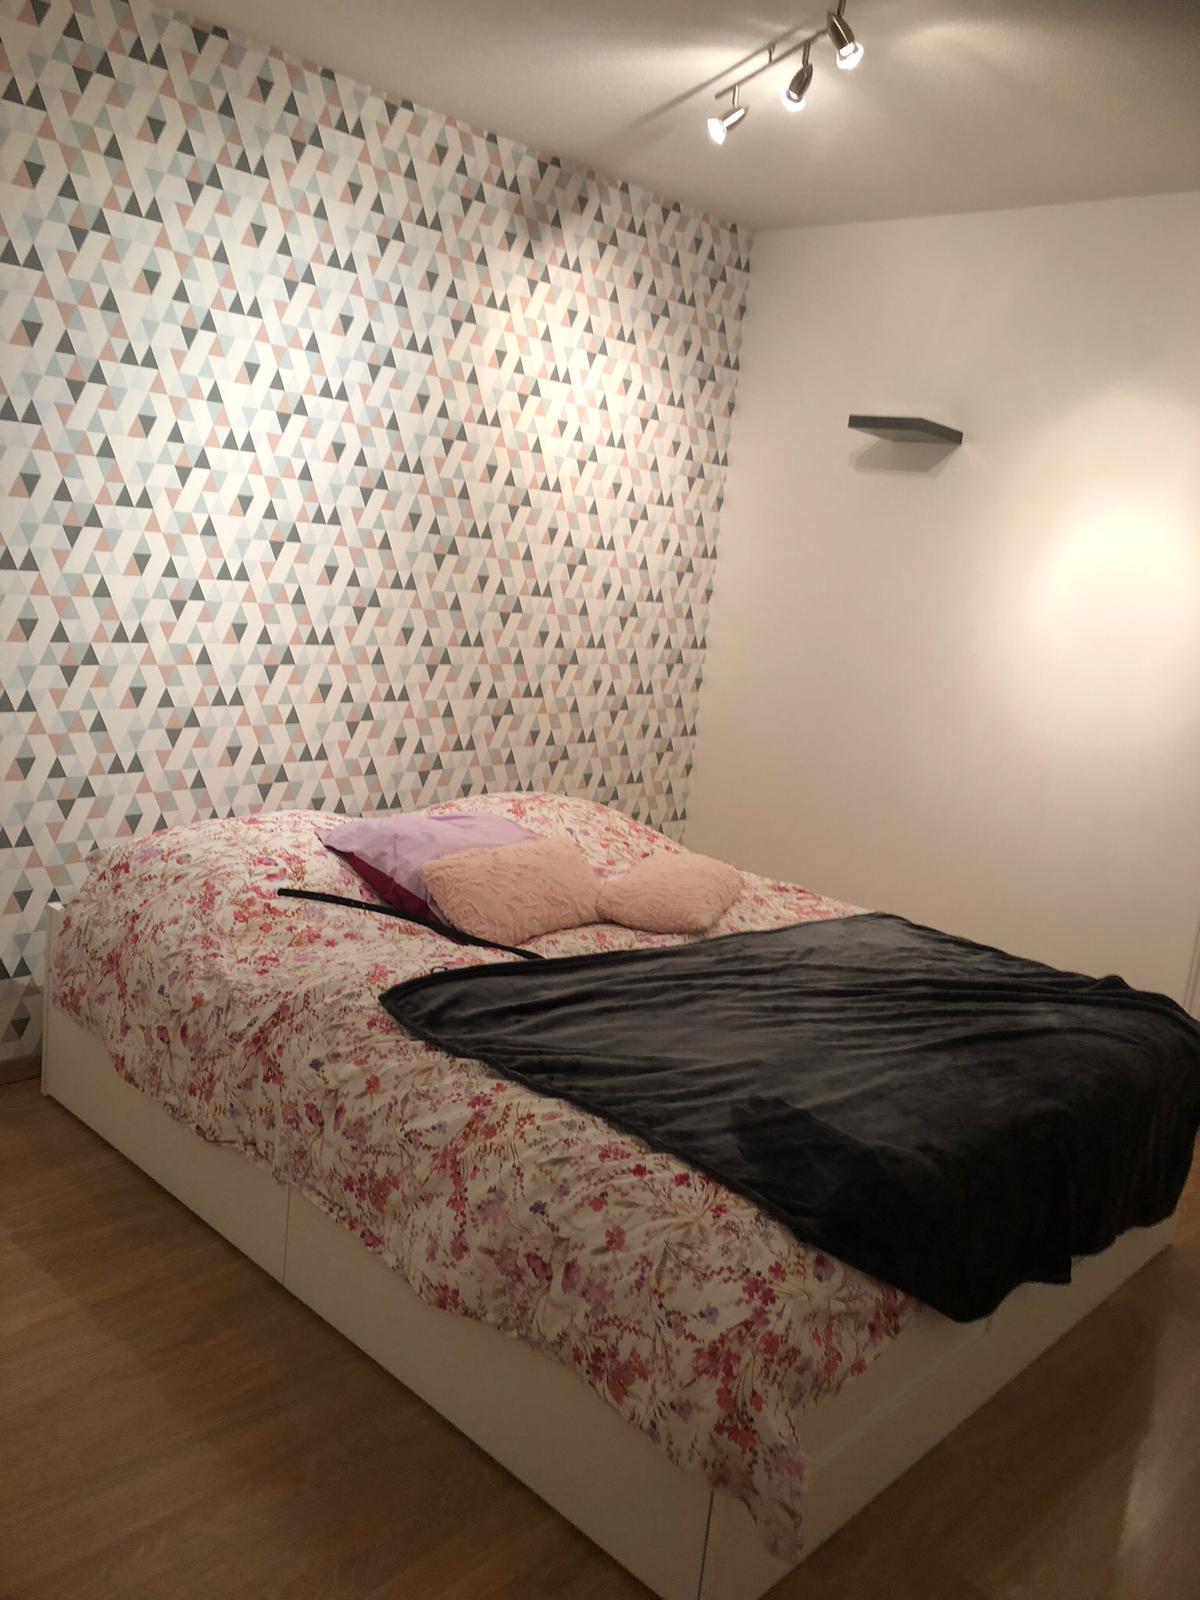 Bedroom with a decorative wallpaper